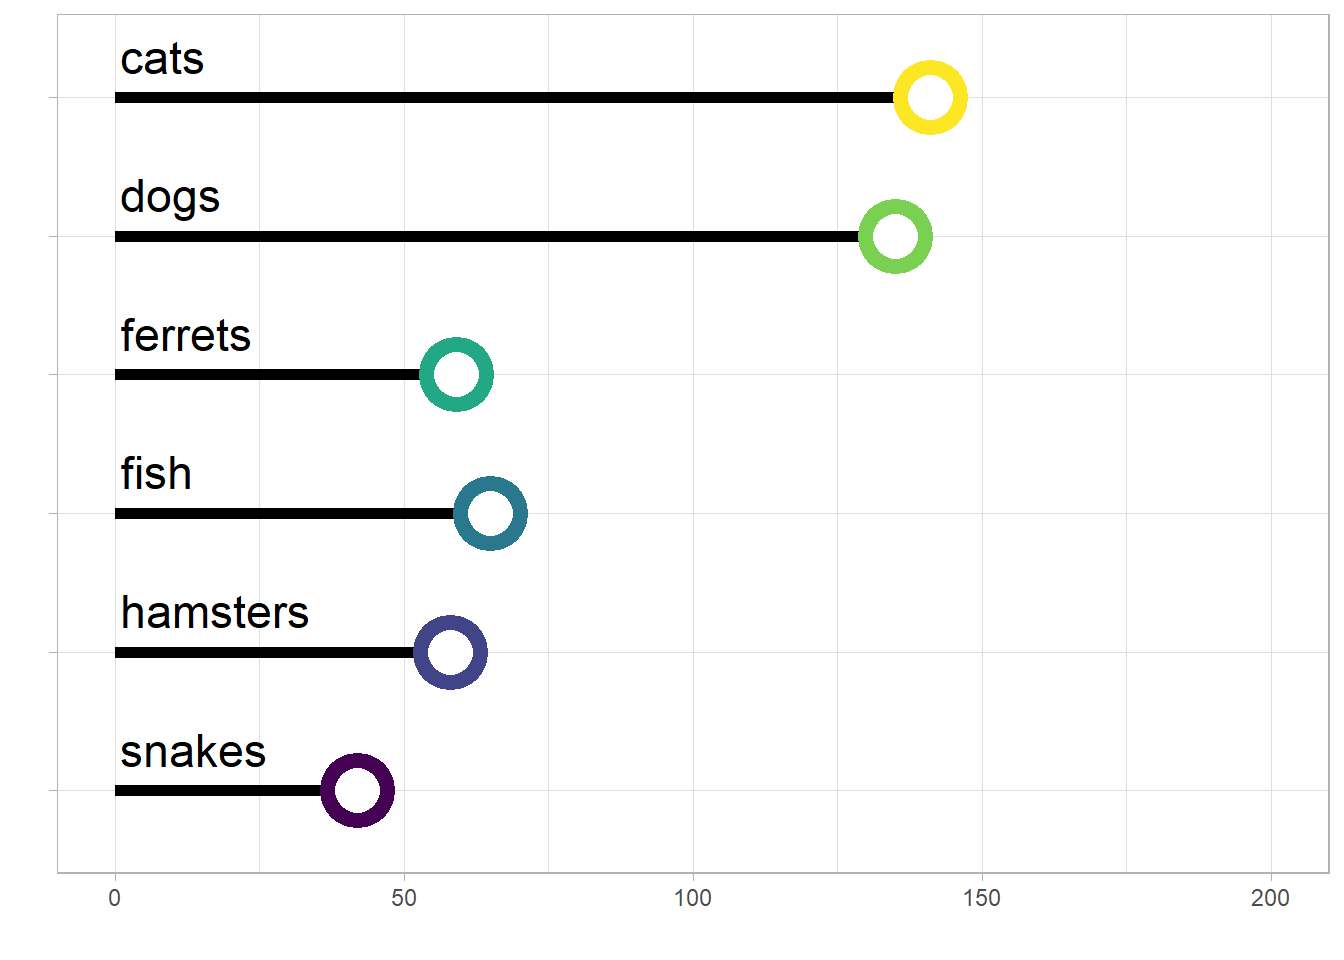 A lollipop plot showing the number of different types of pets.